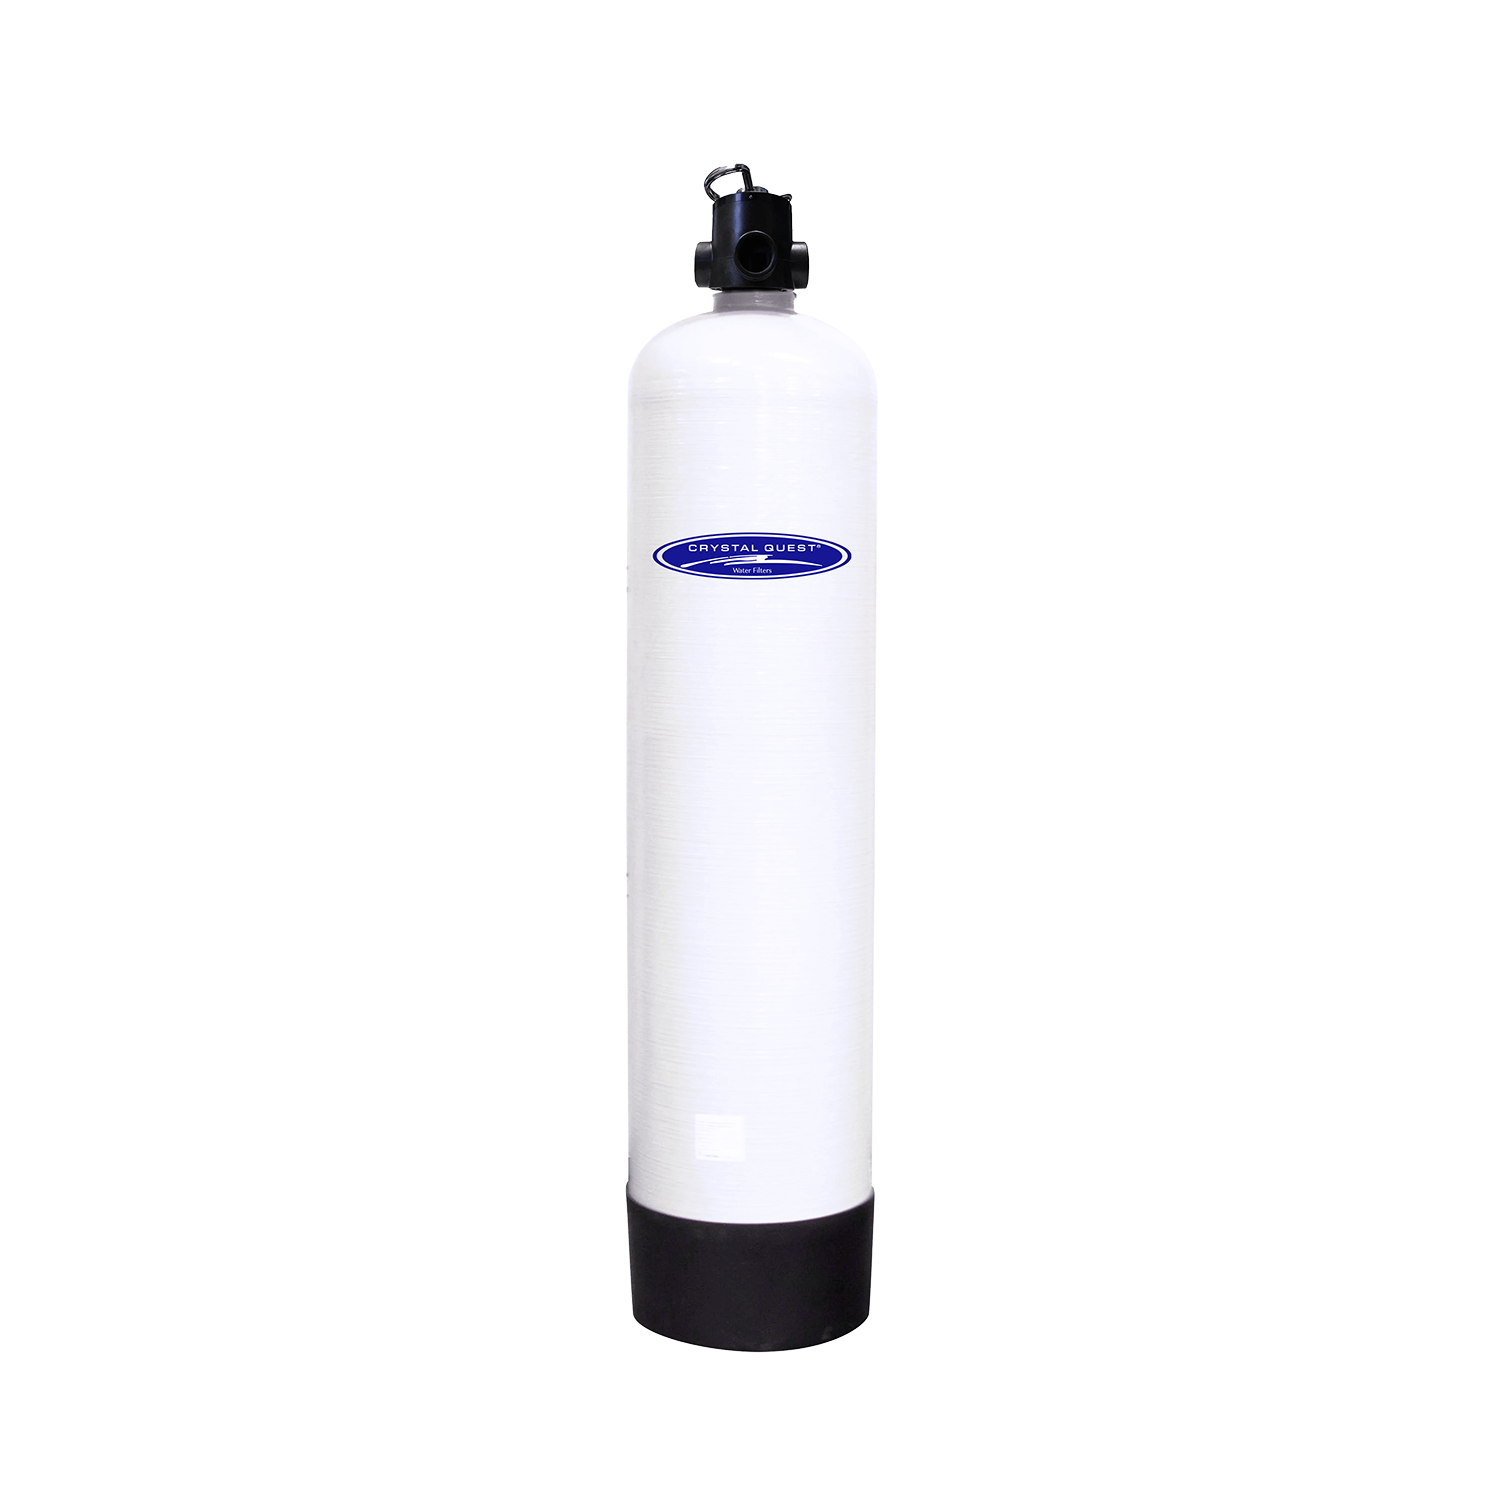 20 GPM / Aluminum Oxide / Manual (Downflow w/ Backwash) Fluoride Removal Water Filtration System - Commercial - Crystal Quest